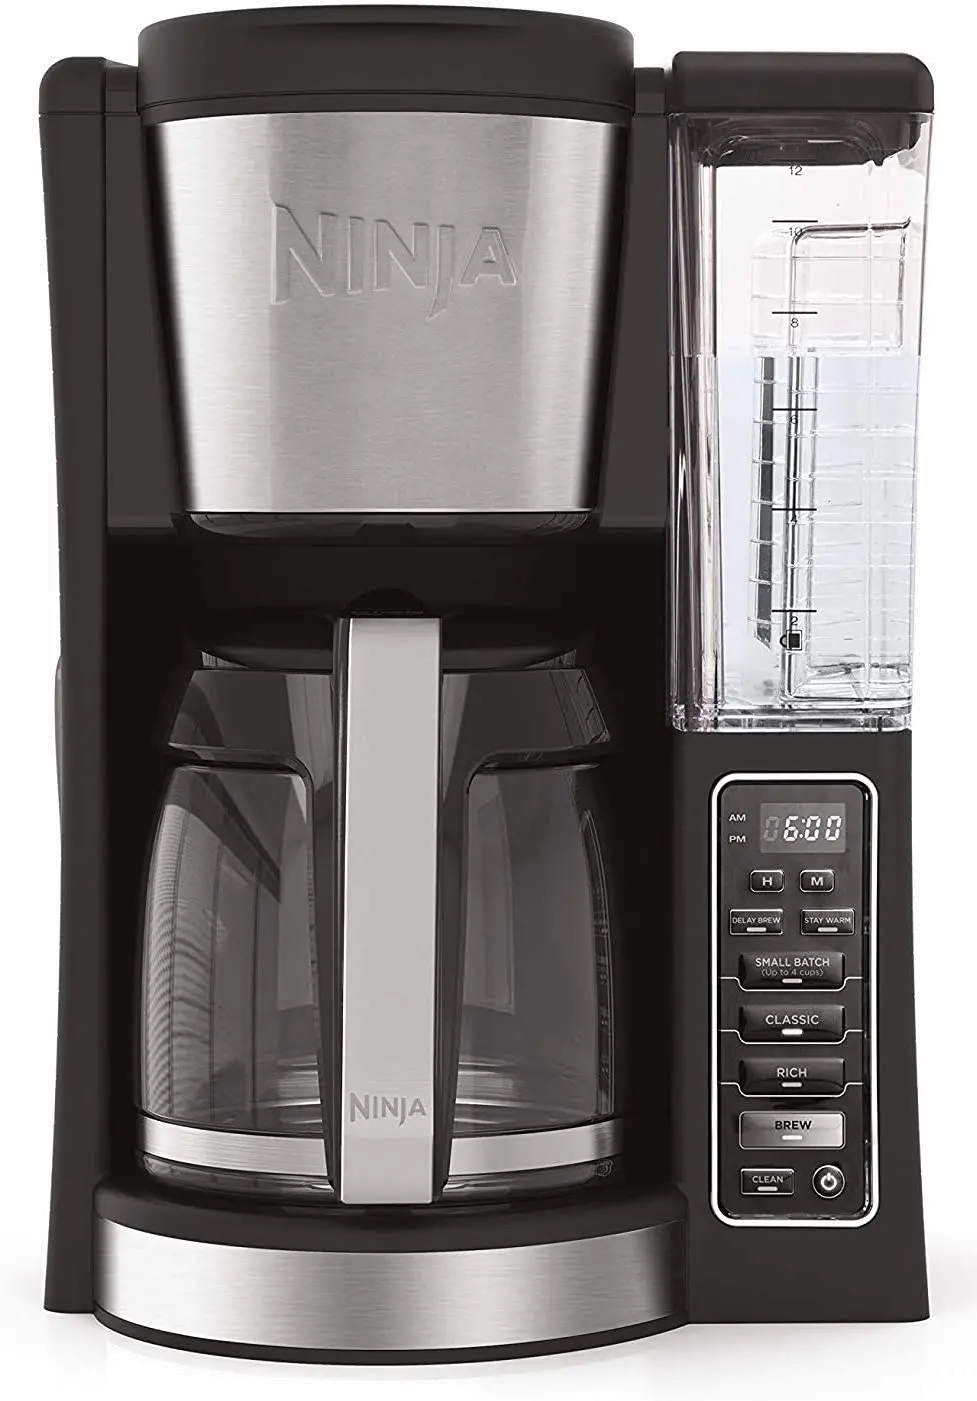 https://static.rcwilley.com/products/112059147/Ninja-12-Cup-Programmable-Coffee-Maker-rcwilley-image1.webp